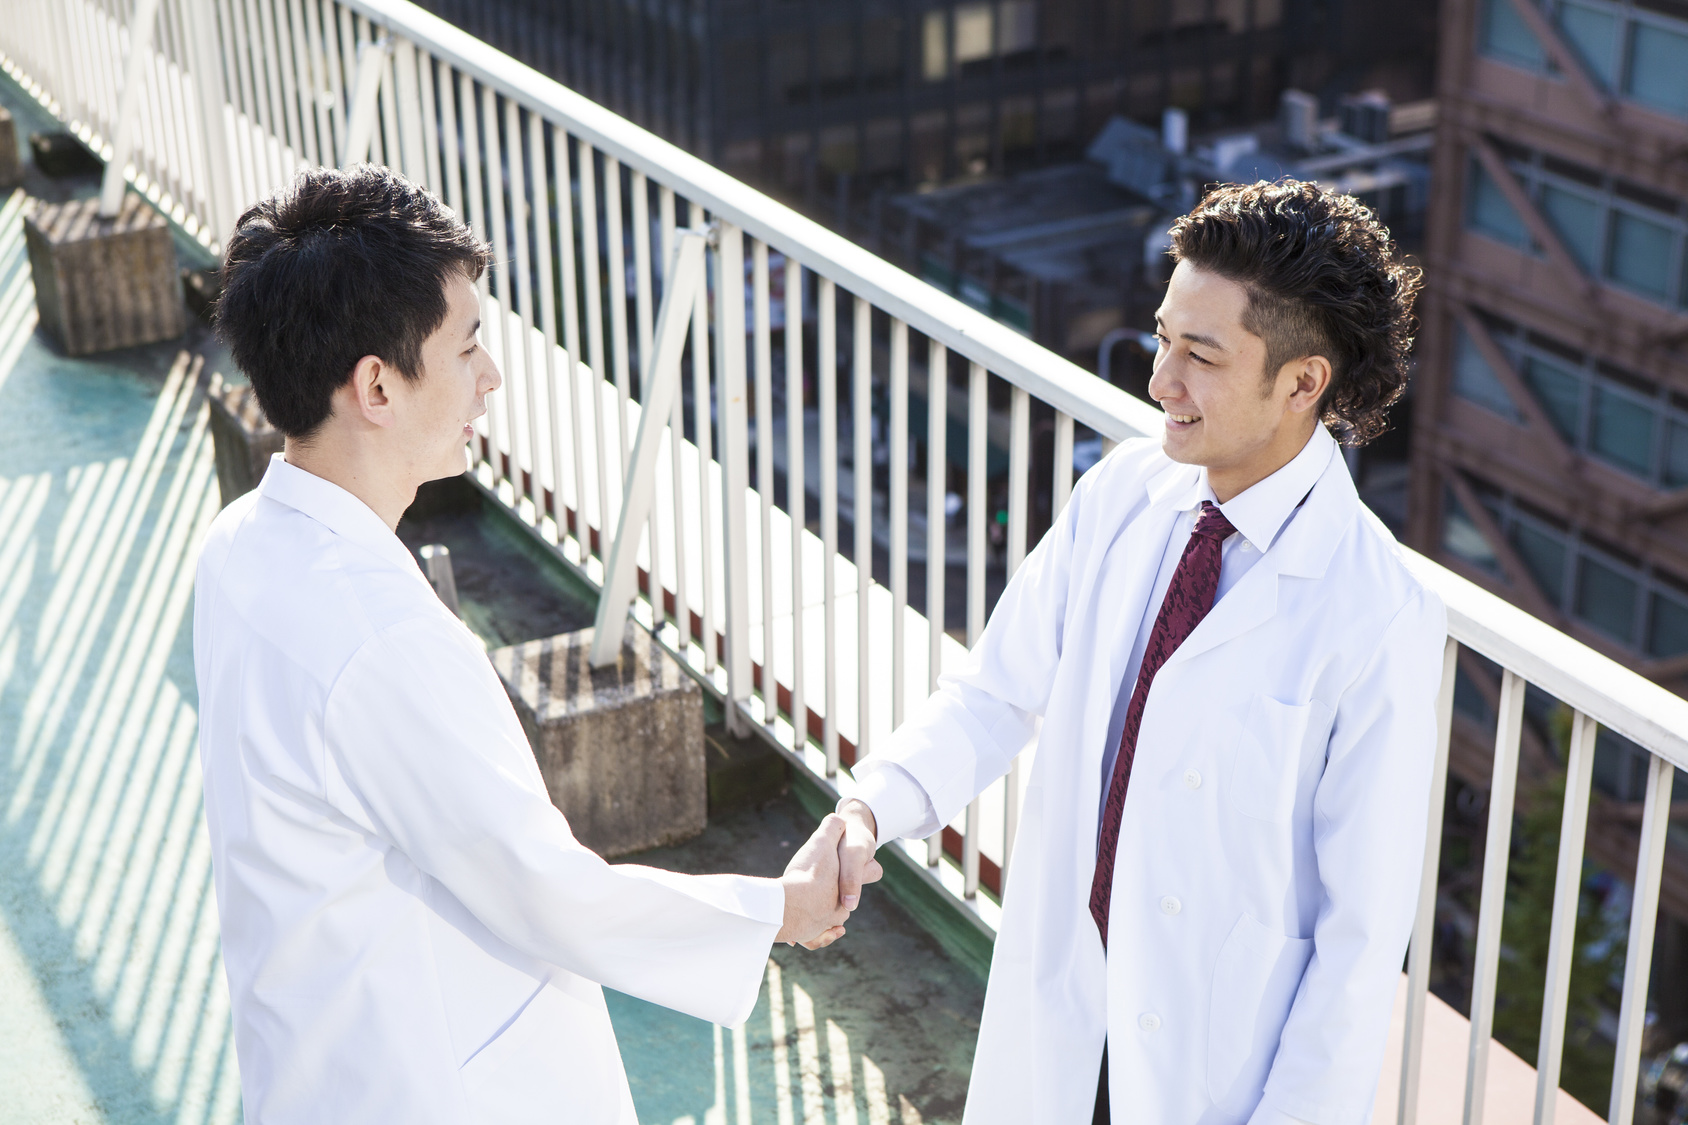 Doctors are shaking hands at the hospital's rooftop